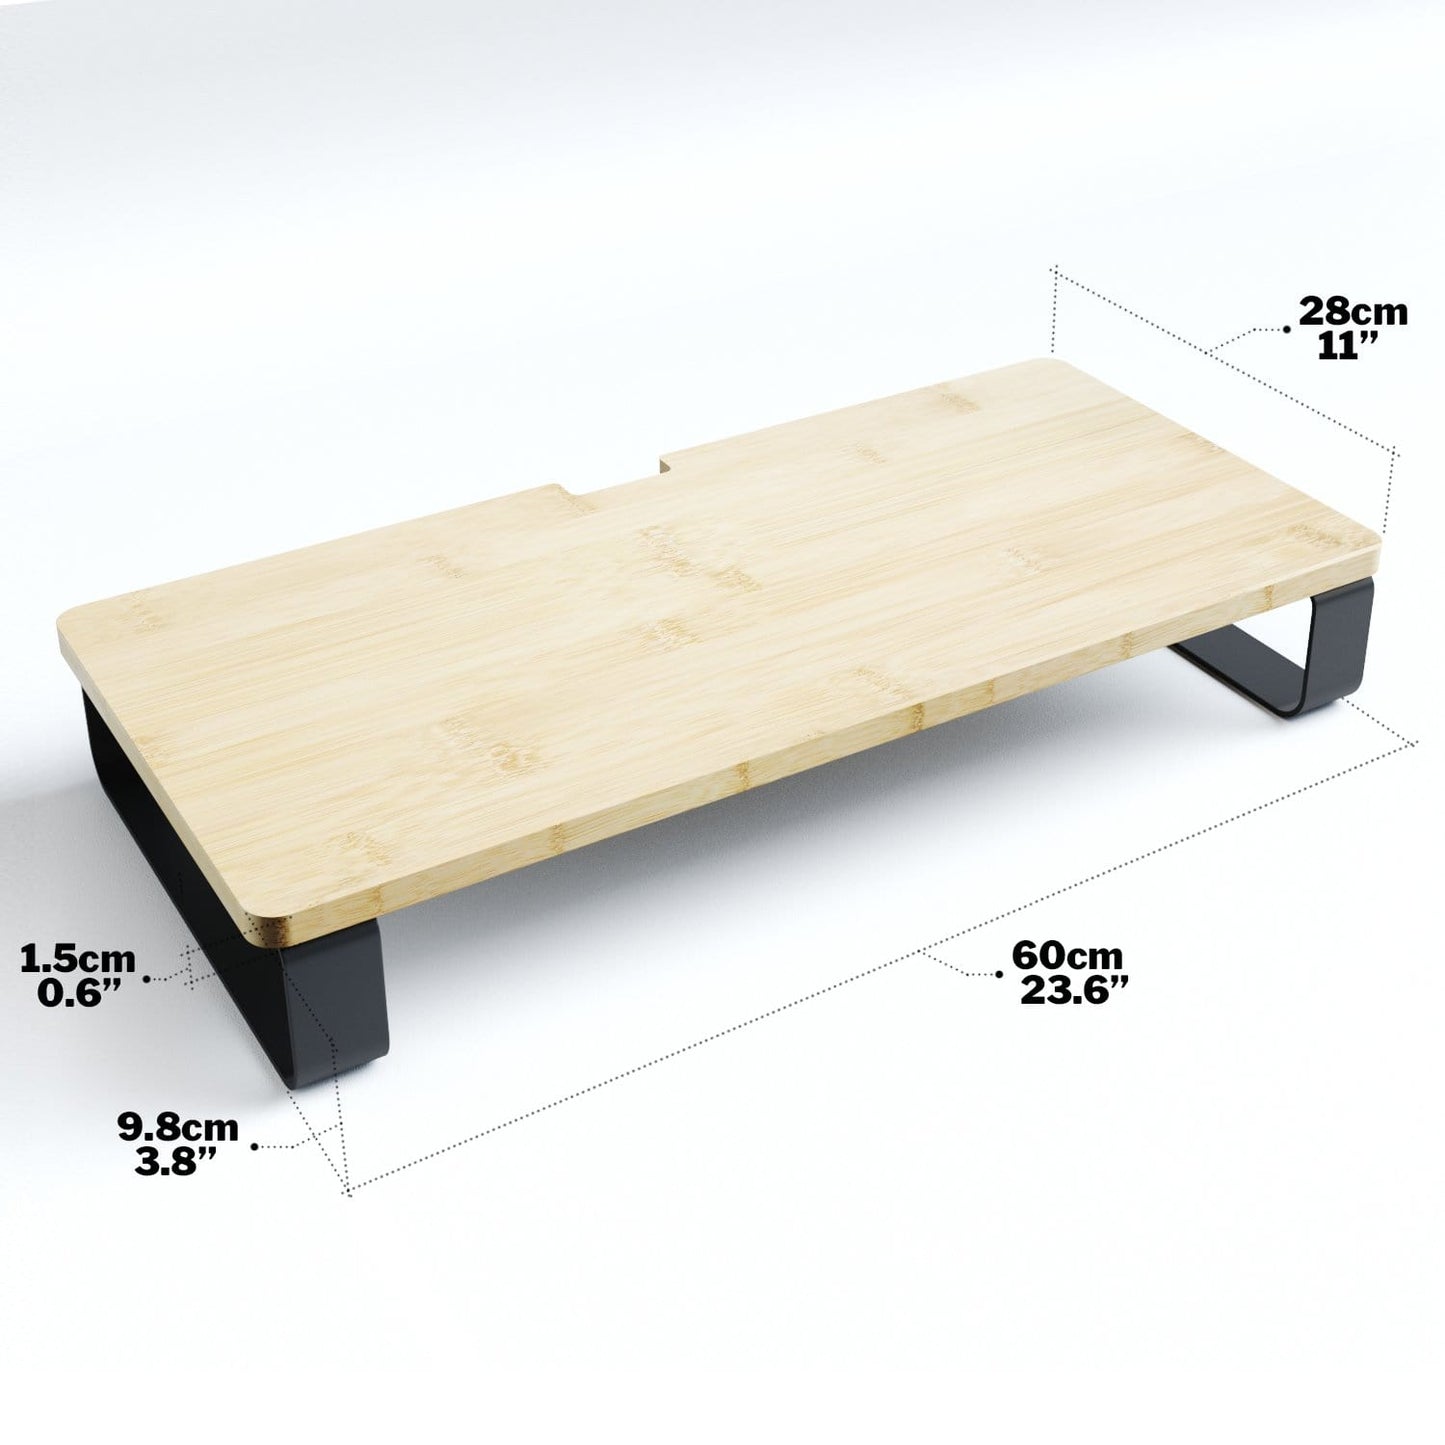 Bamboo Monitor Stand - Wooden Table with Metal Legs by KD Essentials